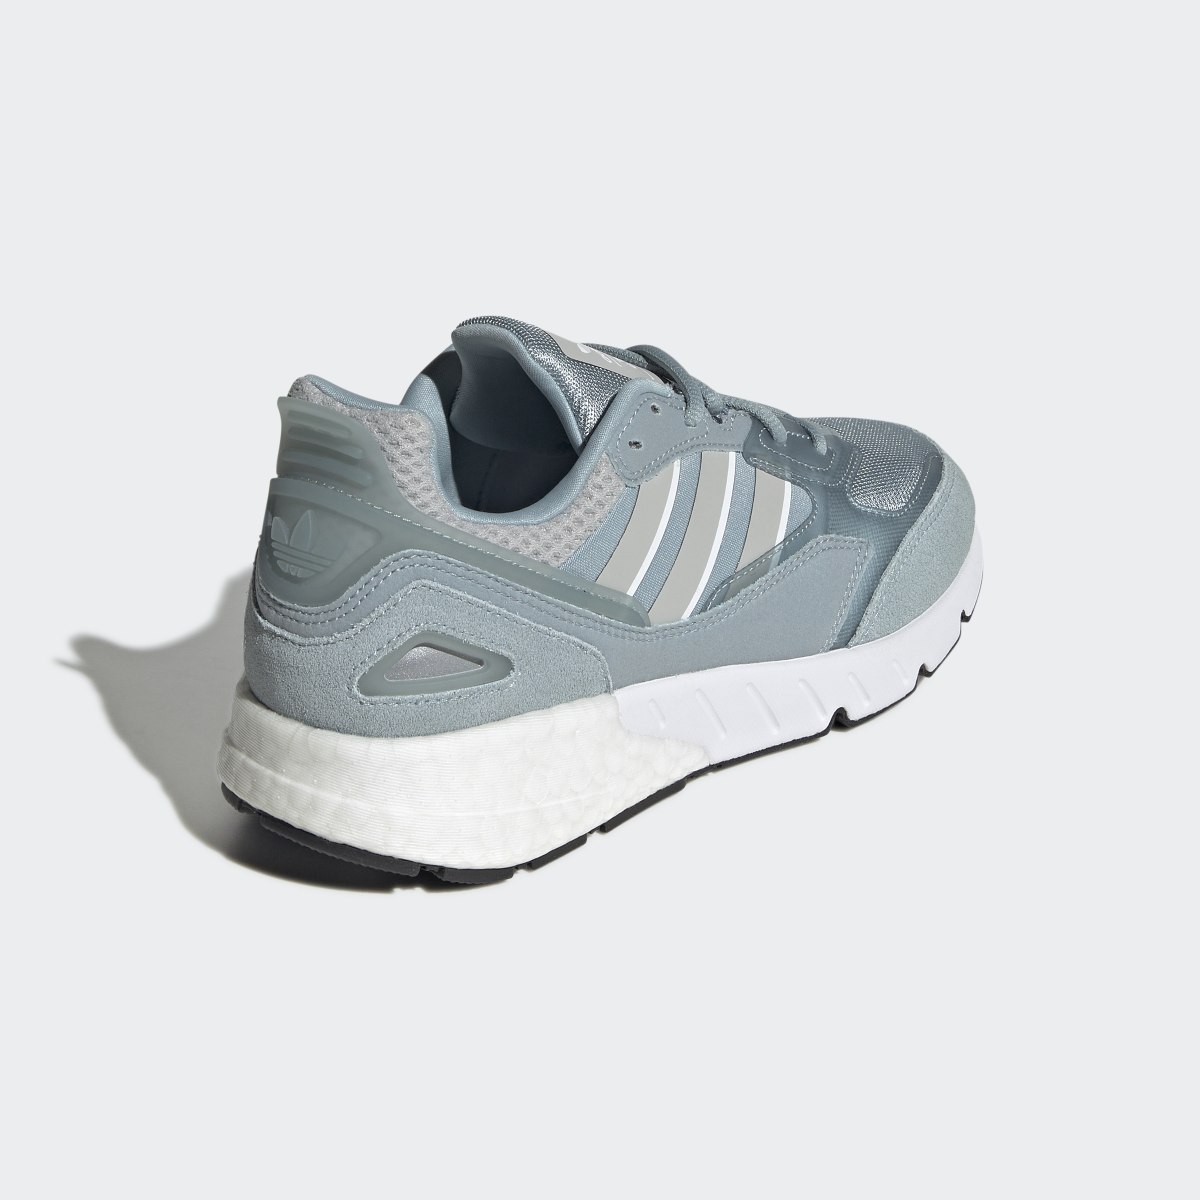 Adidas ZX 1K BOOST 2.0 Shoes. 6